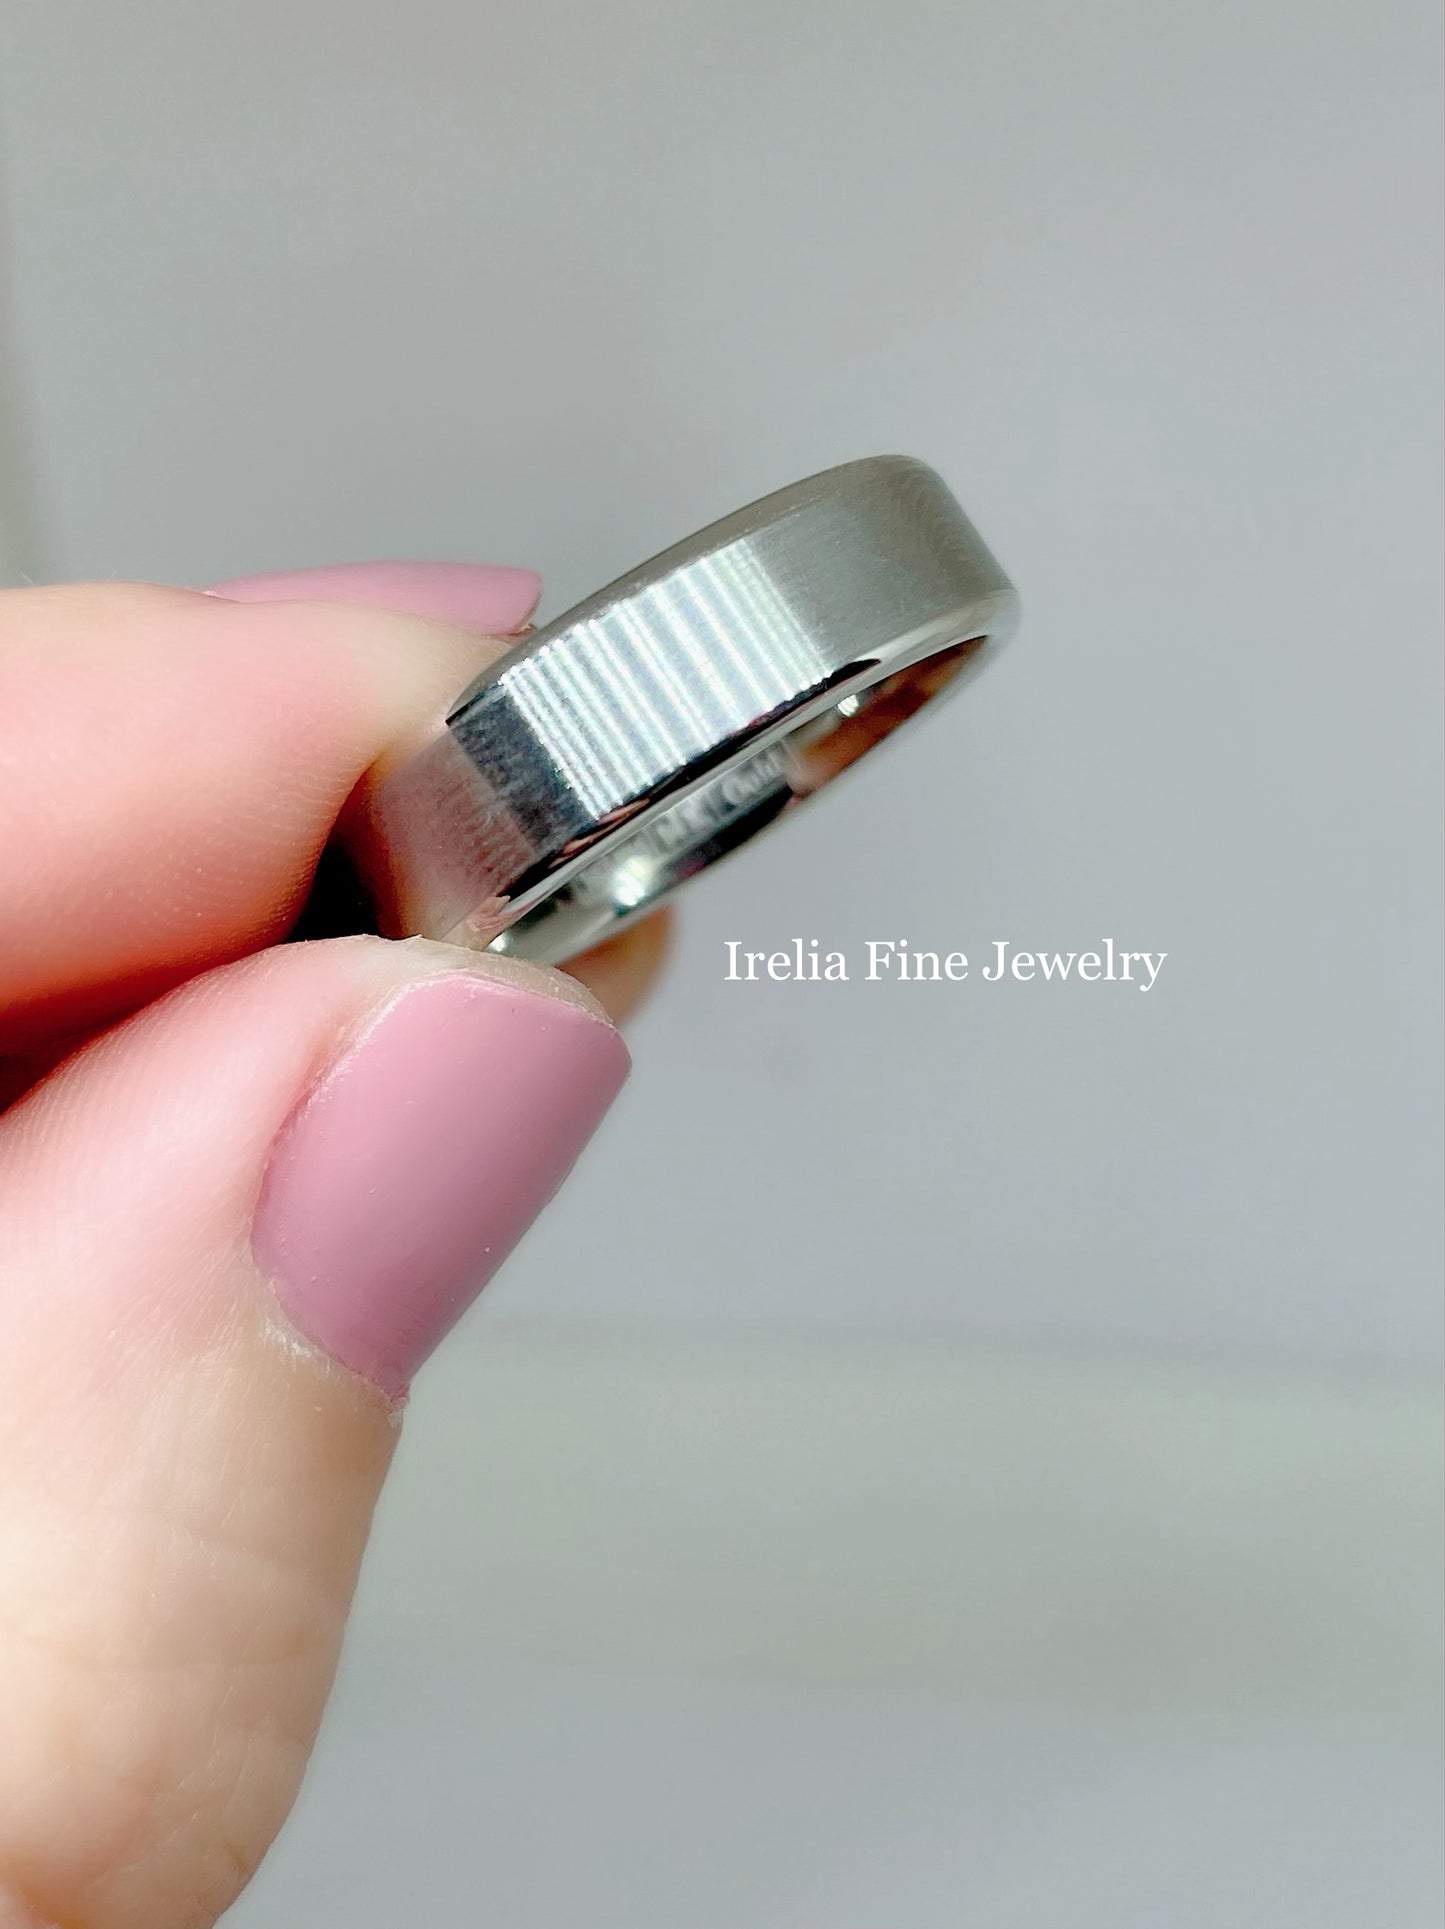 CrownRing Collection - 14k White Gold 6mm Flat Edge With Satin Finish